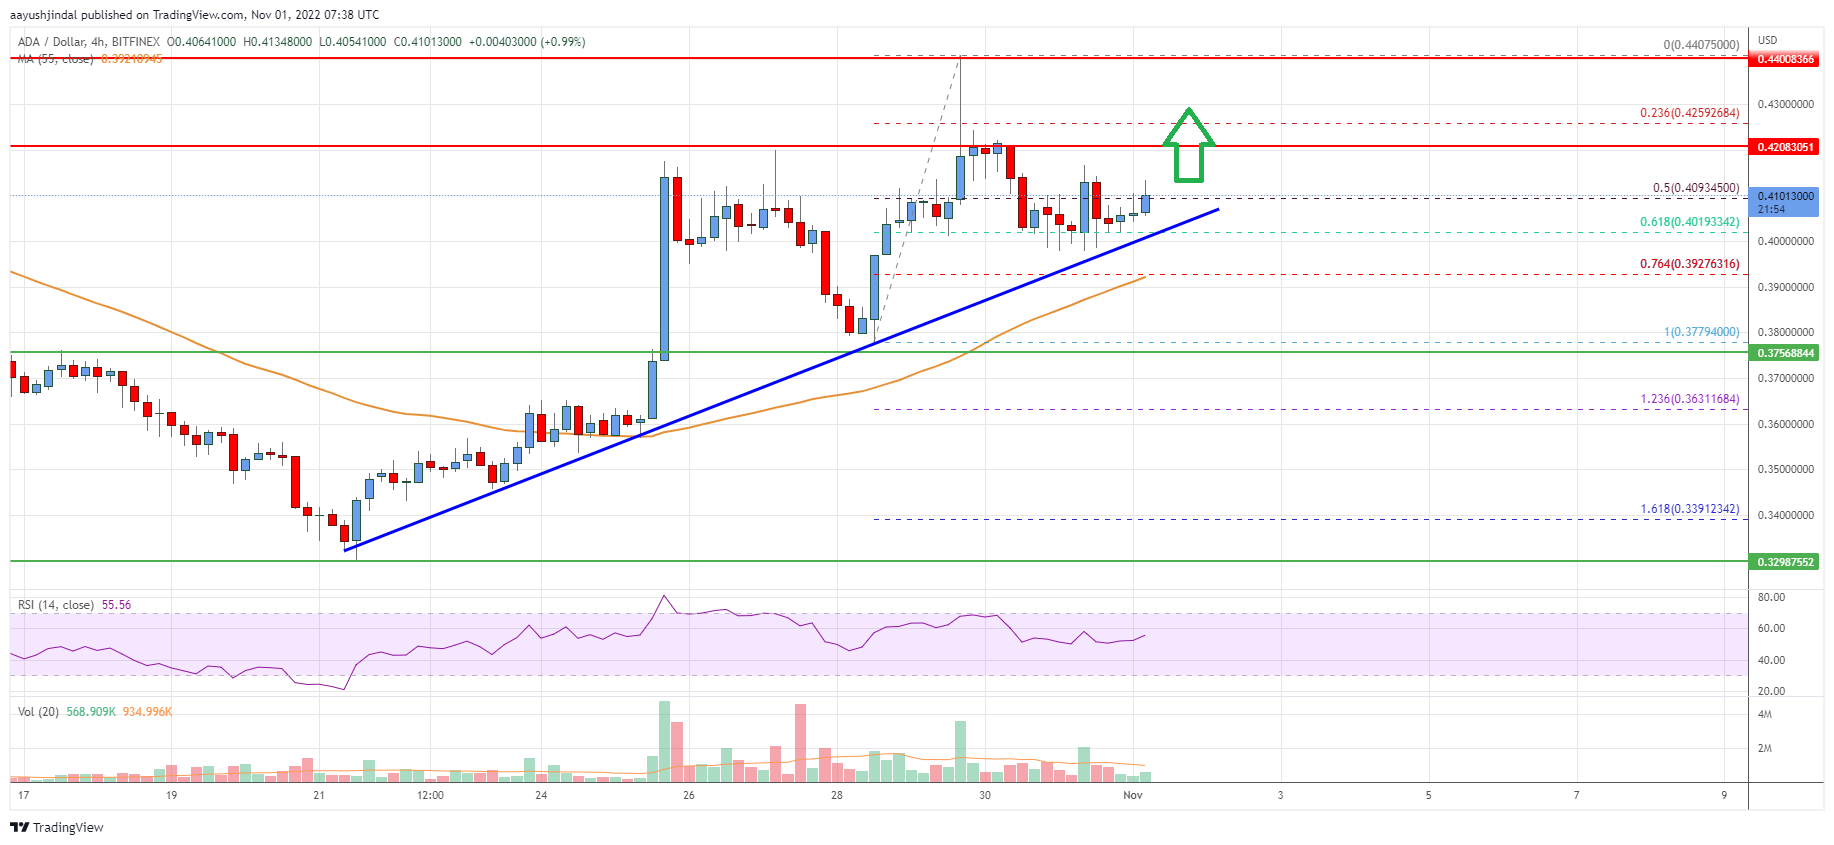 Cardano (ADA) Price Analysis: Uptrend In Place above $0.4